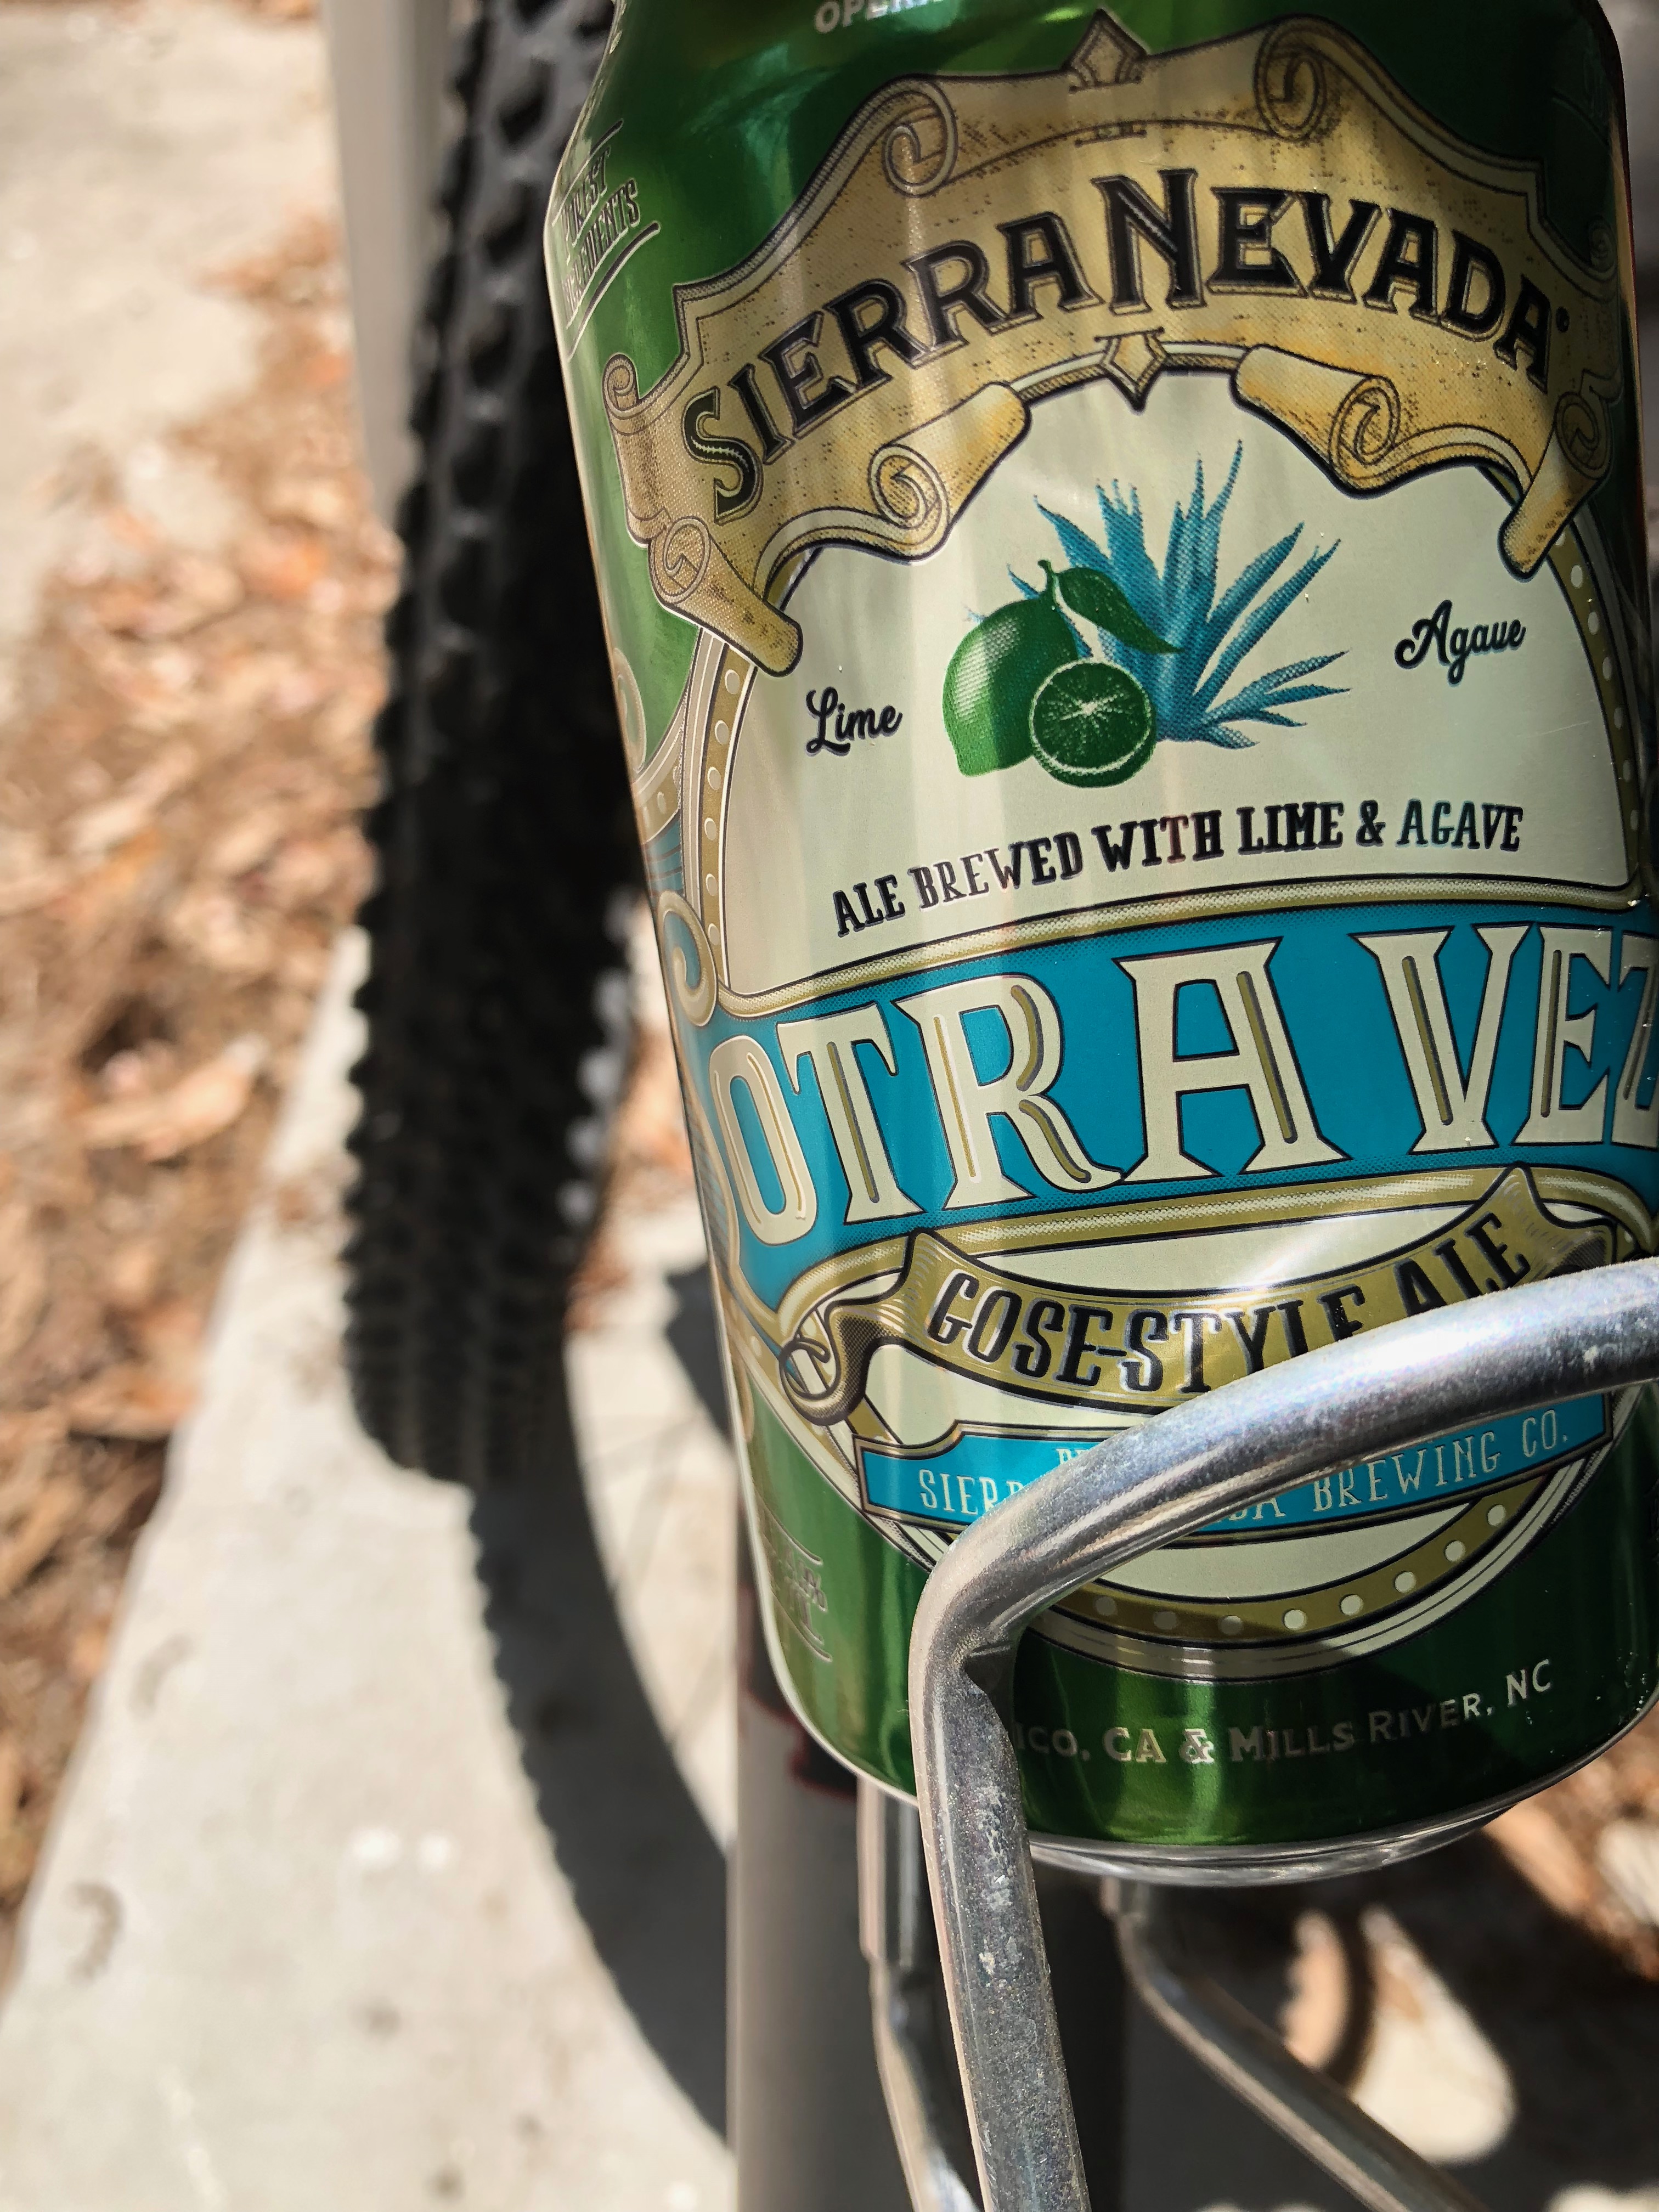 Sierra Nevada Otra Vez Gose - Lime & Agave is a portable, thirst-quenching margarita in a can.